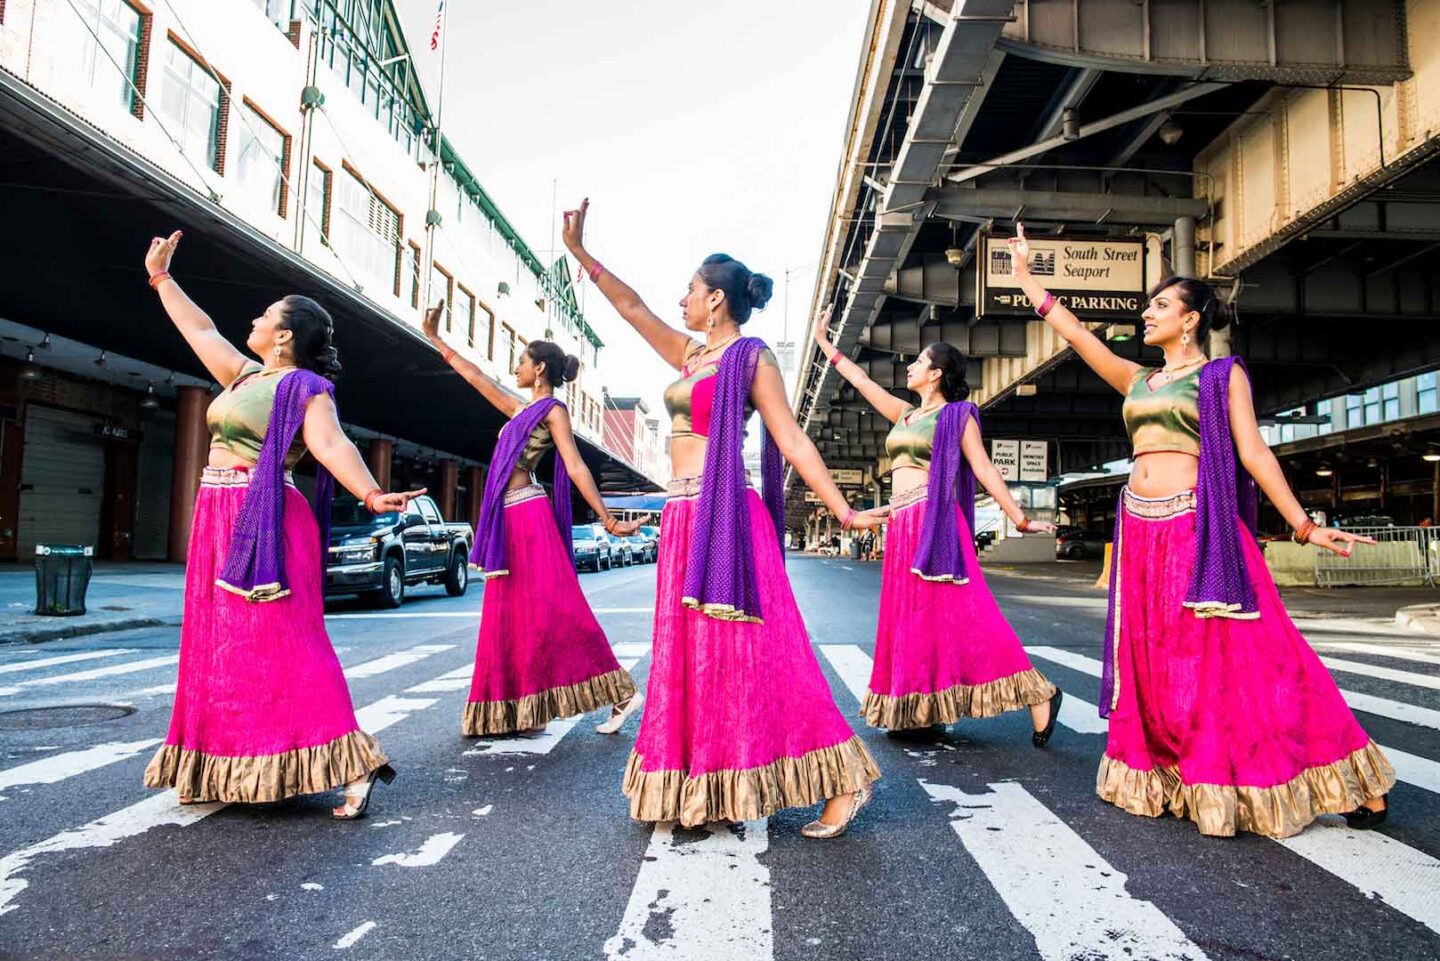 Dancers in pink dresses and purple scarves dance in the street